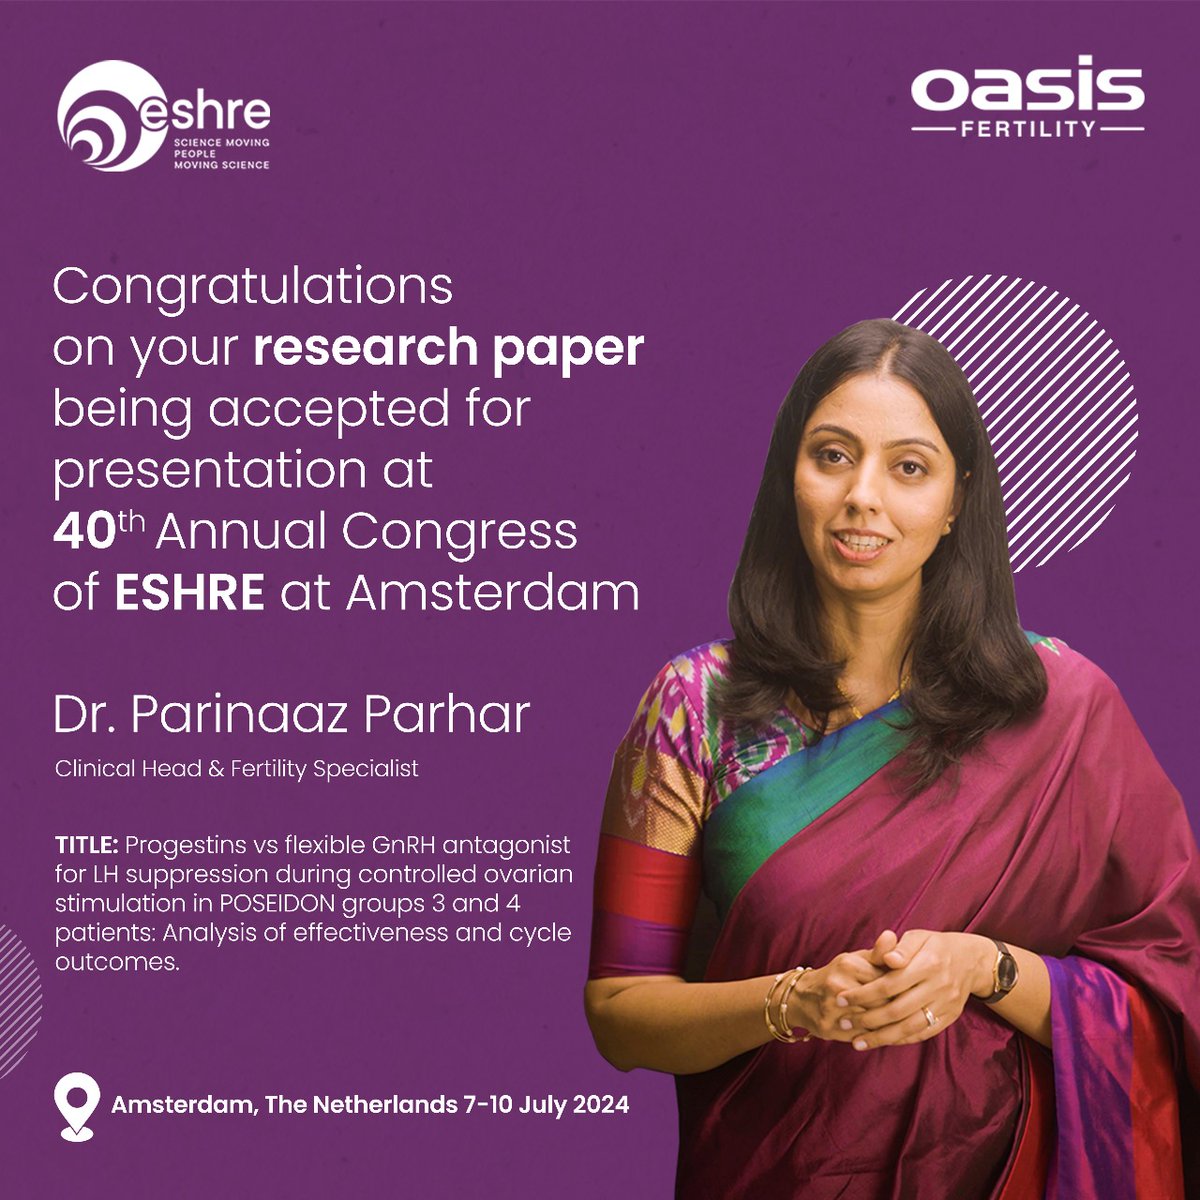 We're delighted to share that Dr. Parinaaz has been selected to present her findings at the global stage of ESHRE 2024.

#DrParinaaz #ESHRE2024 #GlobalStage #ResearchFindings #Delighted #Presenting #MedicalConference #ScientificAchievement #InternationalRecognition #proudmoments